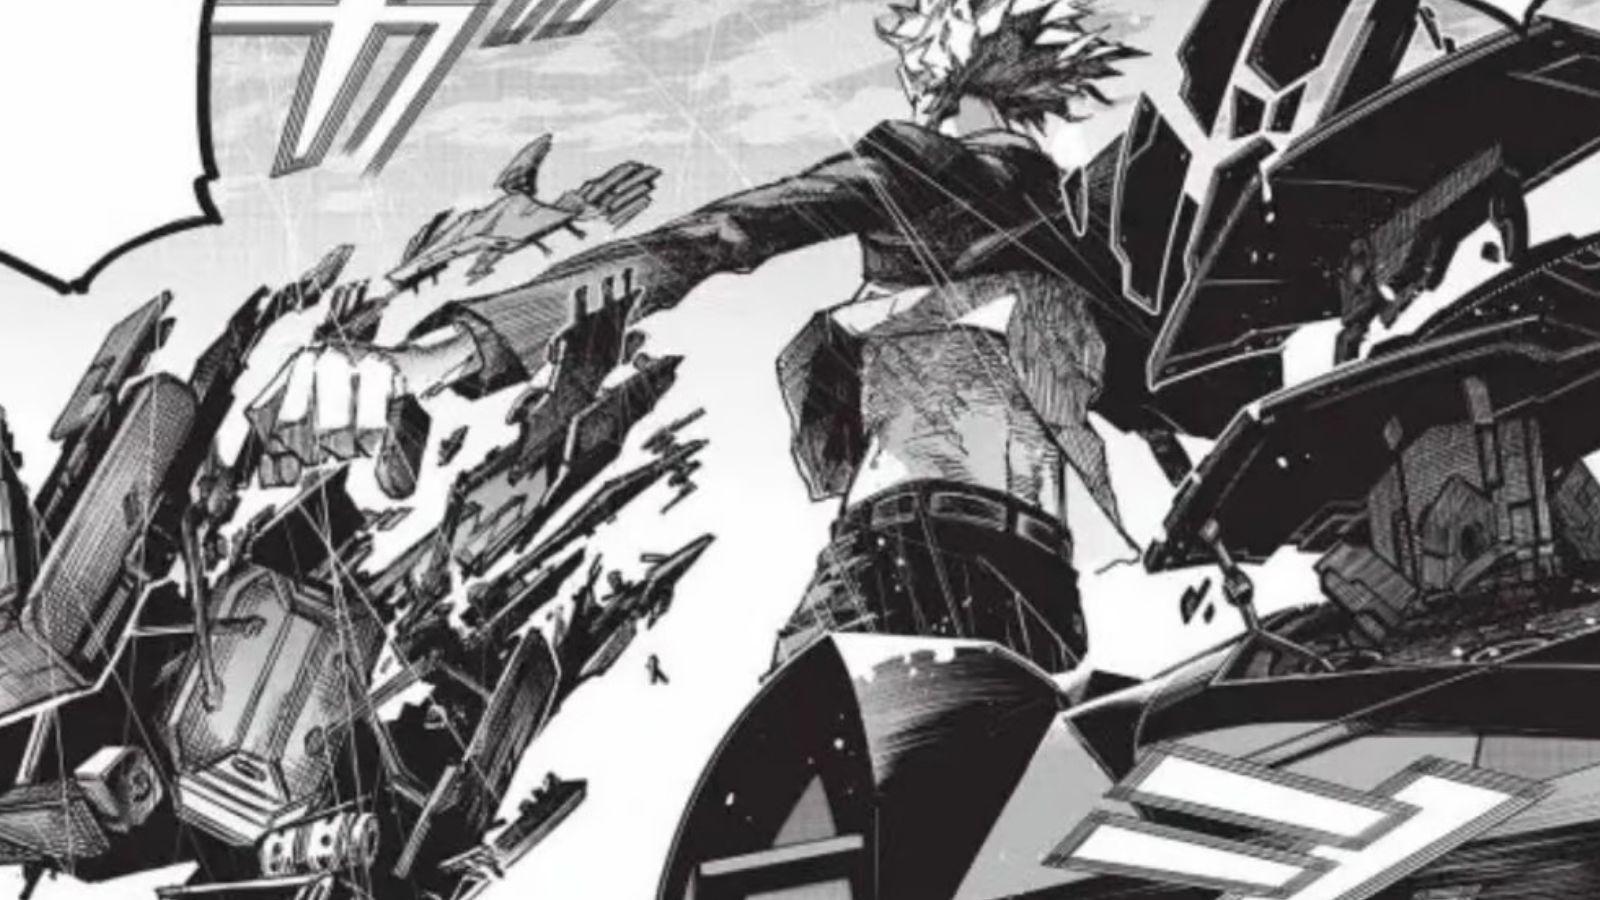 All For One's BACKSTORY! - My Hero Academia Chapter 407 Review